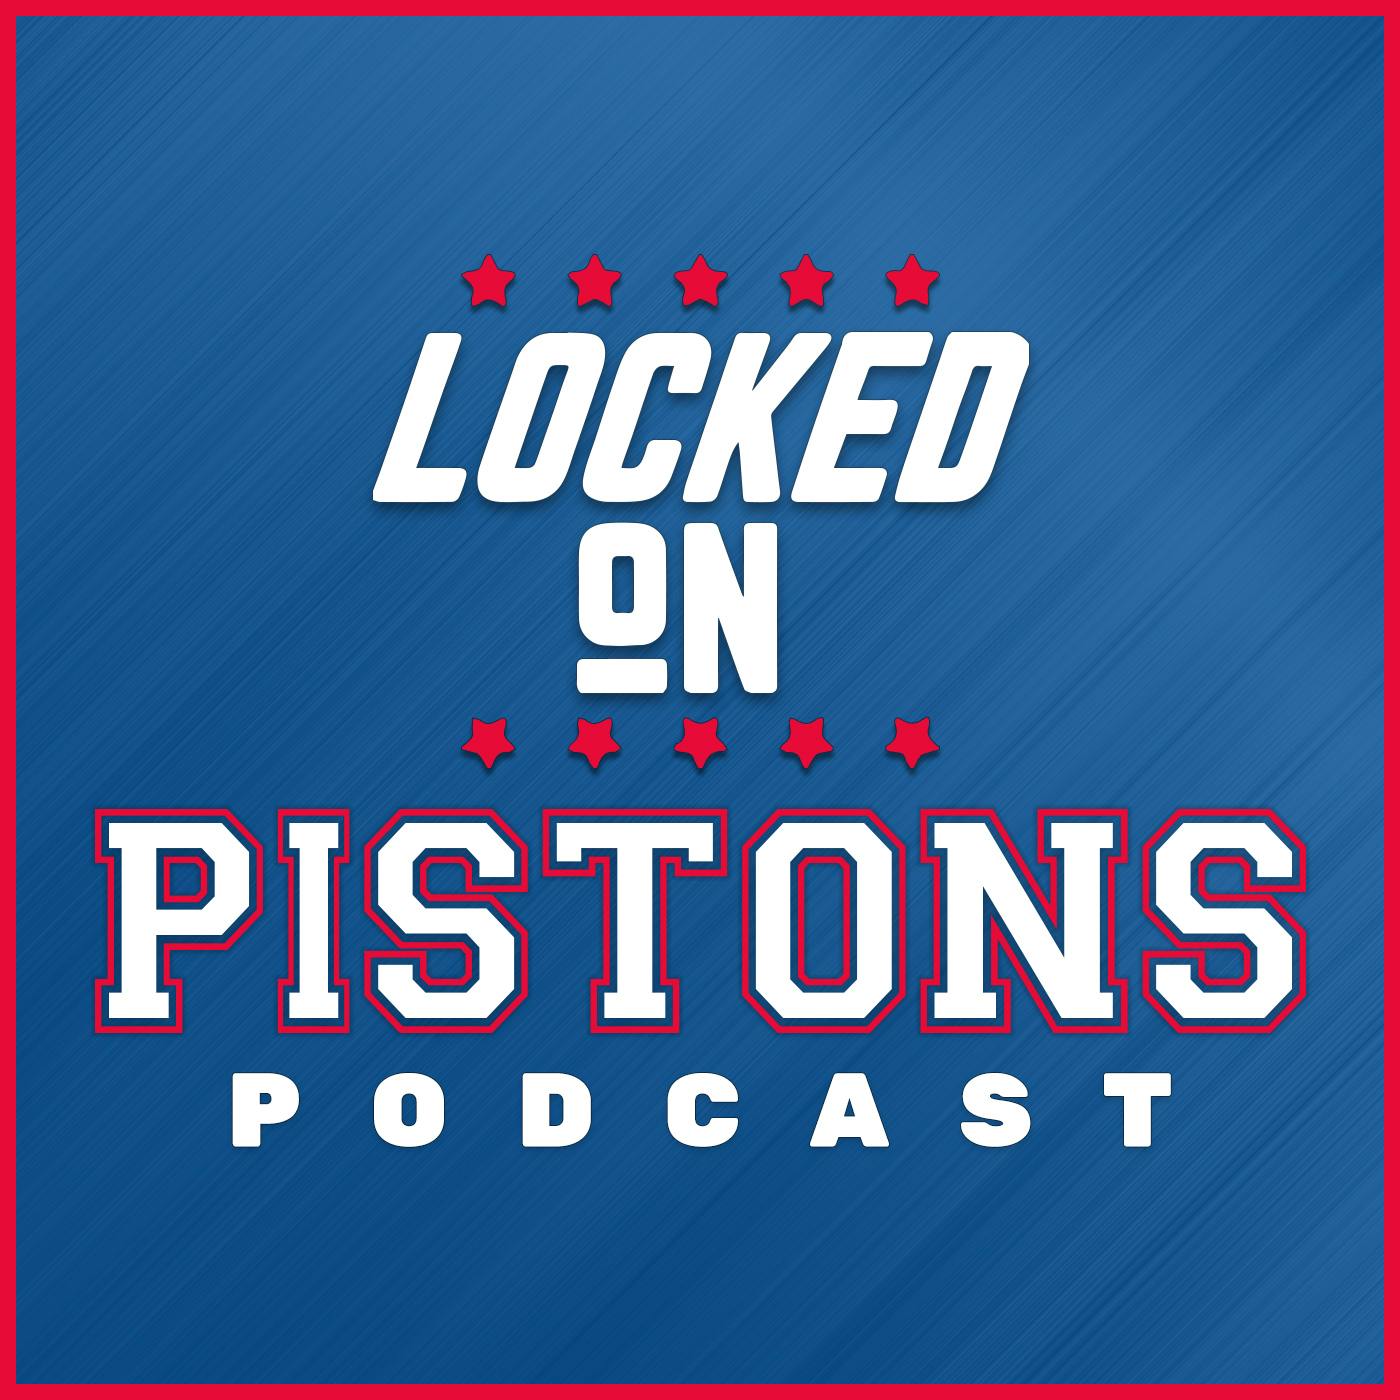 Grant Hill reflects on Pistons tenure, disdain for teal and excitement  about No. 1 pick Cade Cunningham